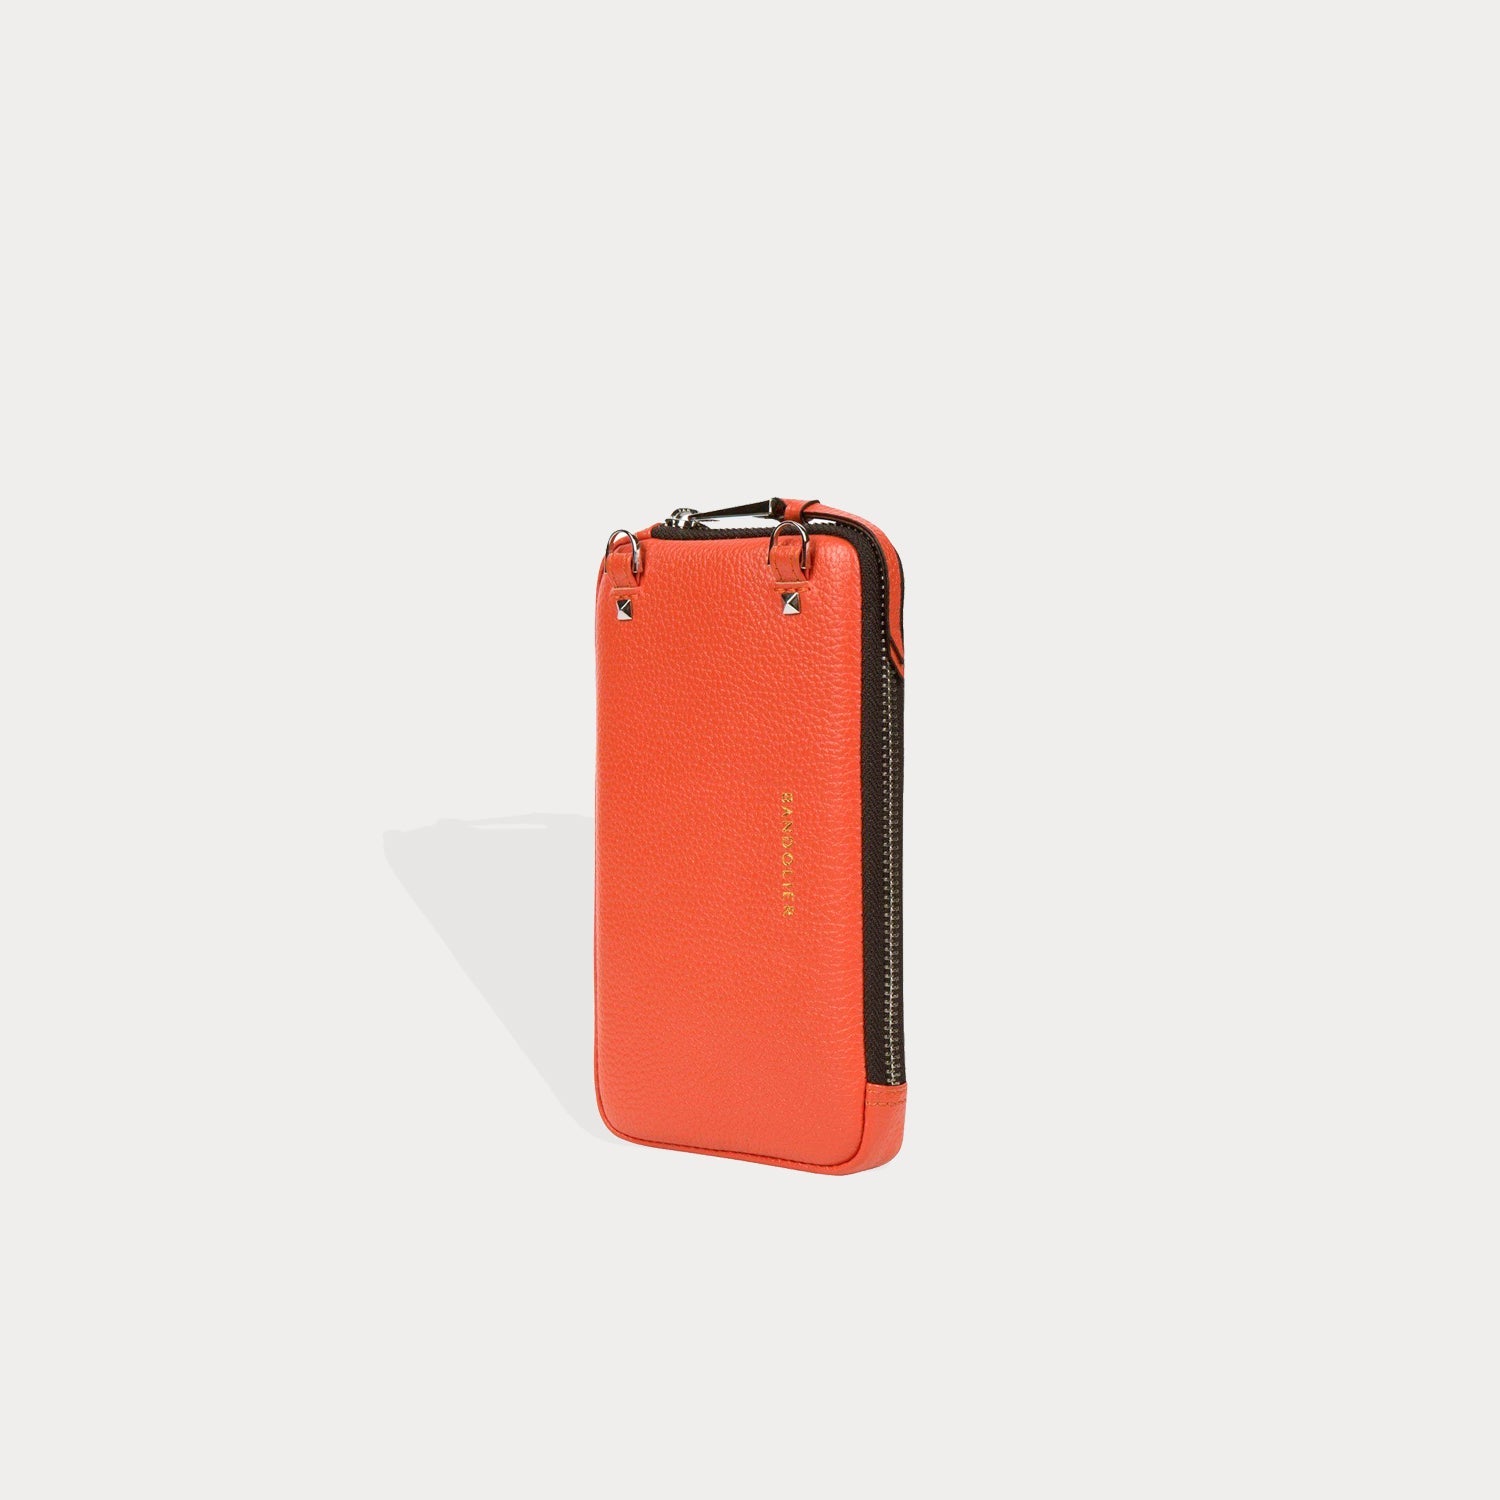 Pebble Leather Expanded Zip Pouch - Orange/Silver Pouch Bandolier 